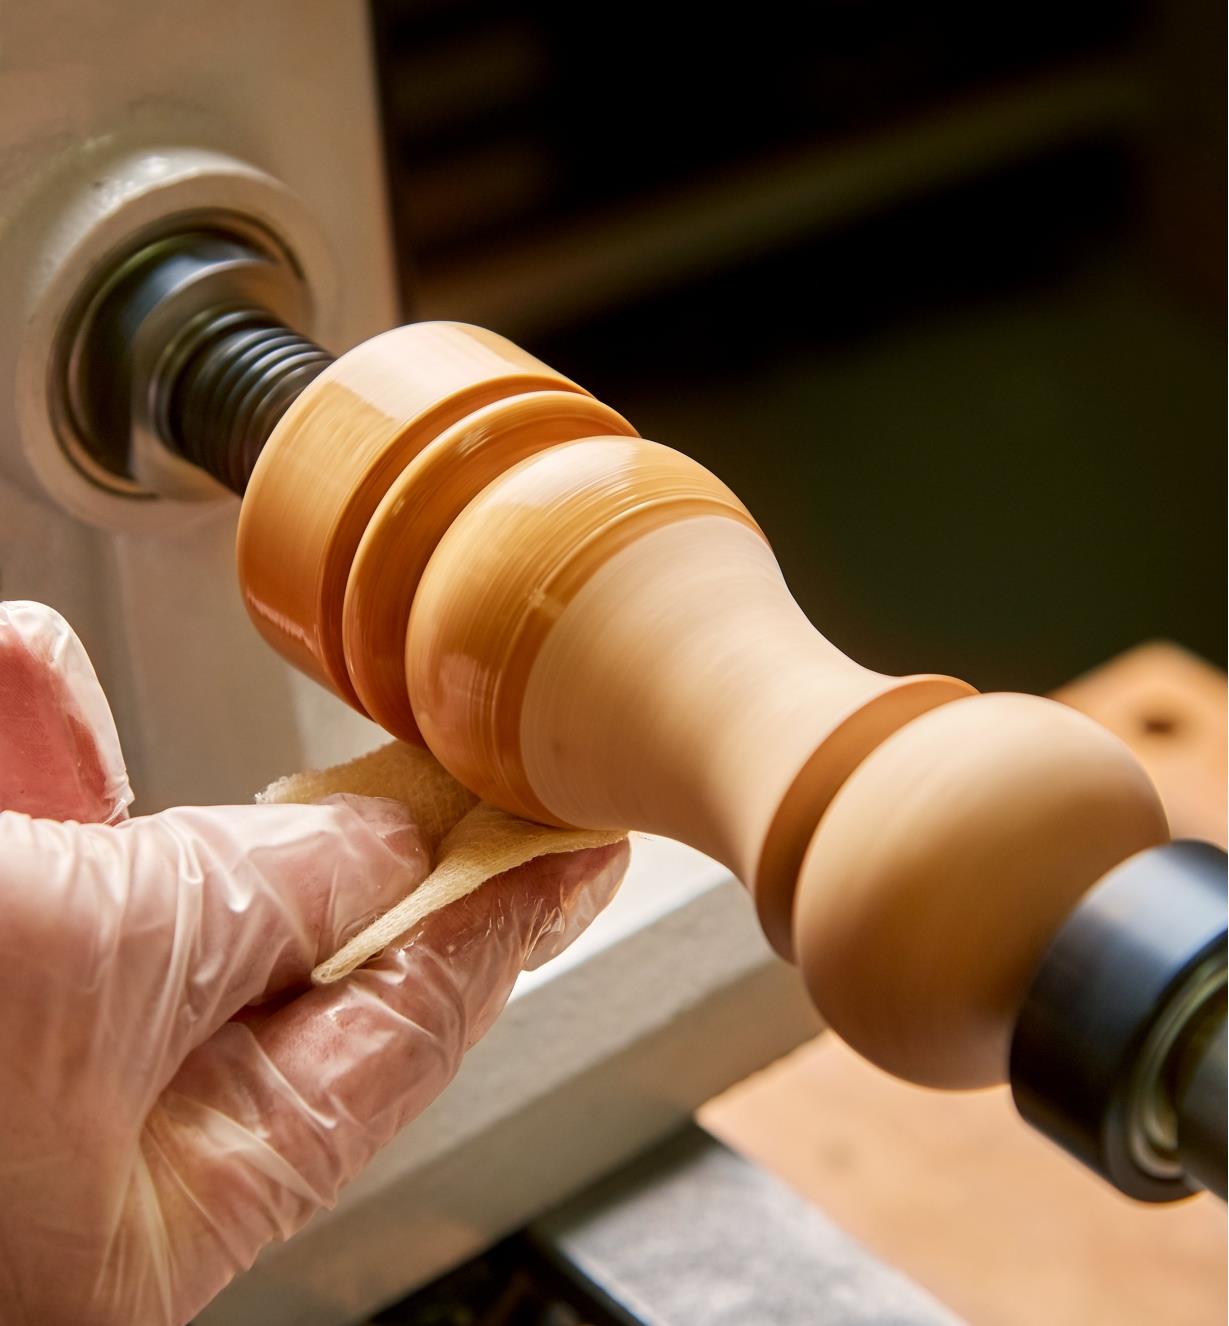 Applying General wood bowl finish to a workpiece mounted on a lathe